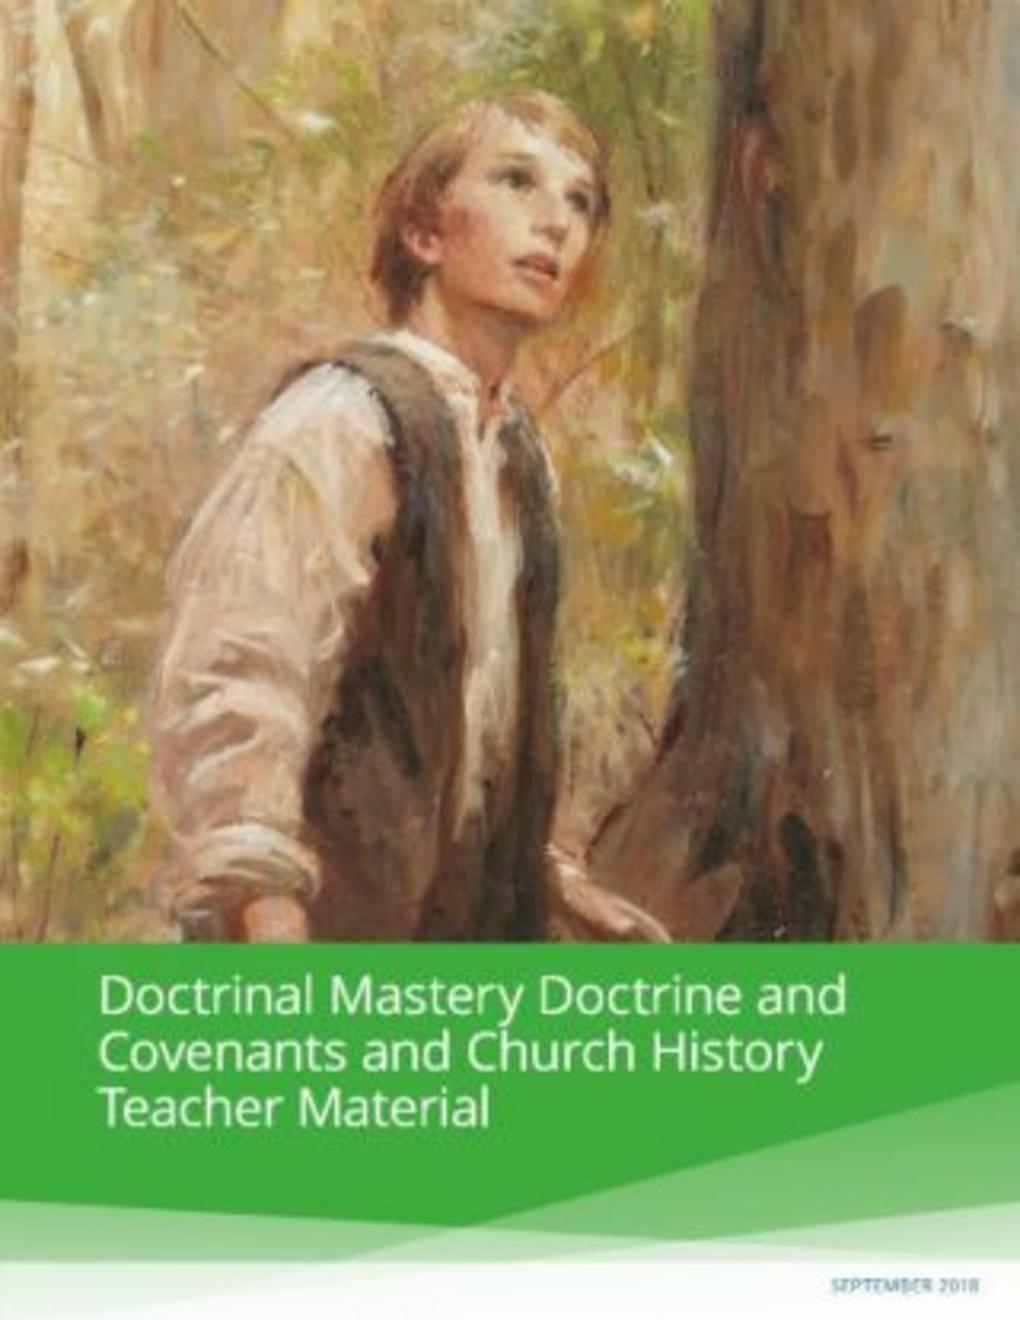 Doctrinal Mastery Doctrine and Covenants and Church History Teacher Material